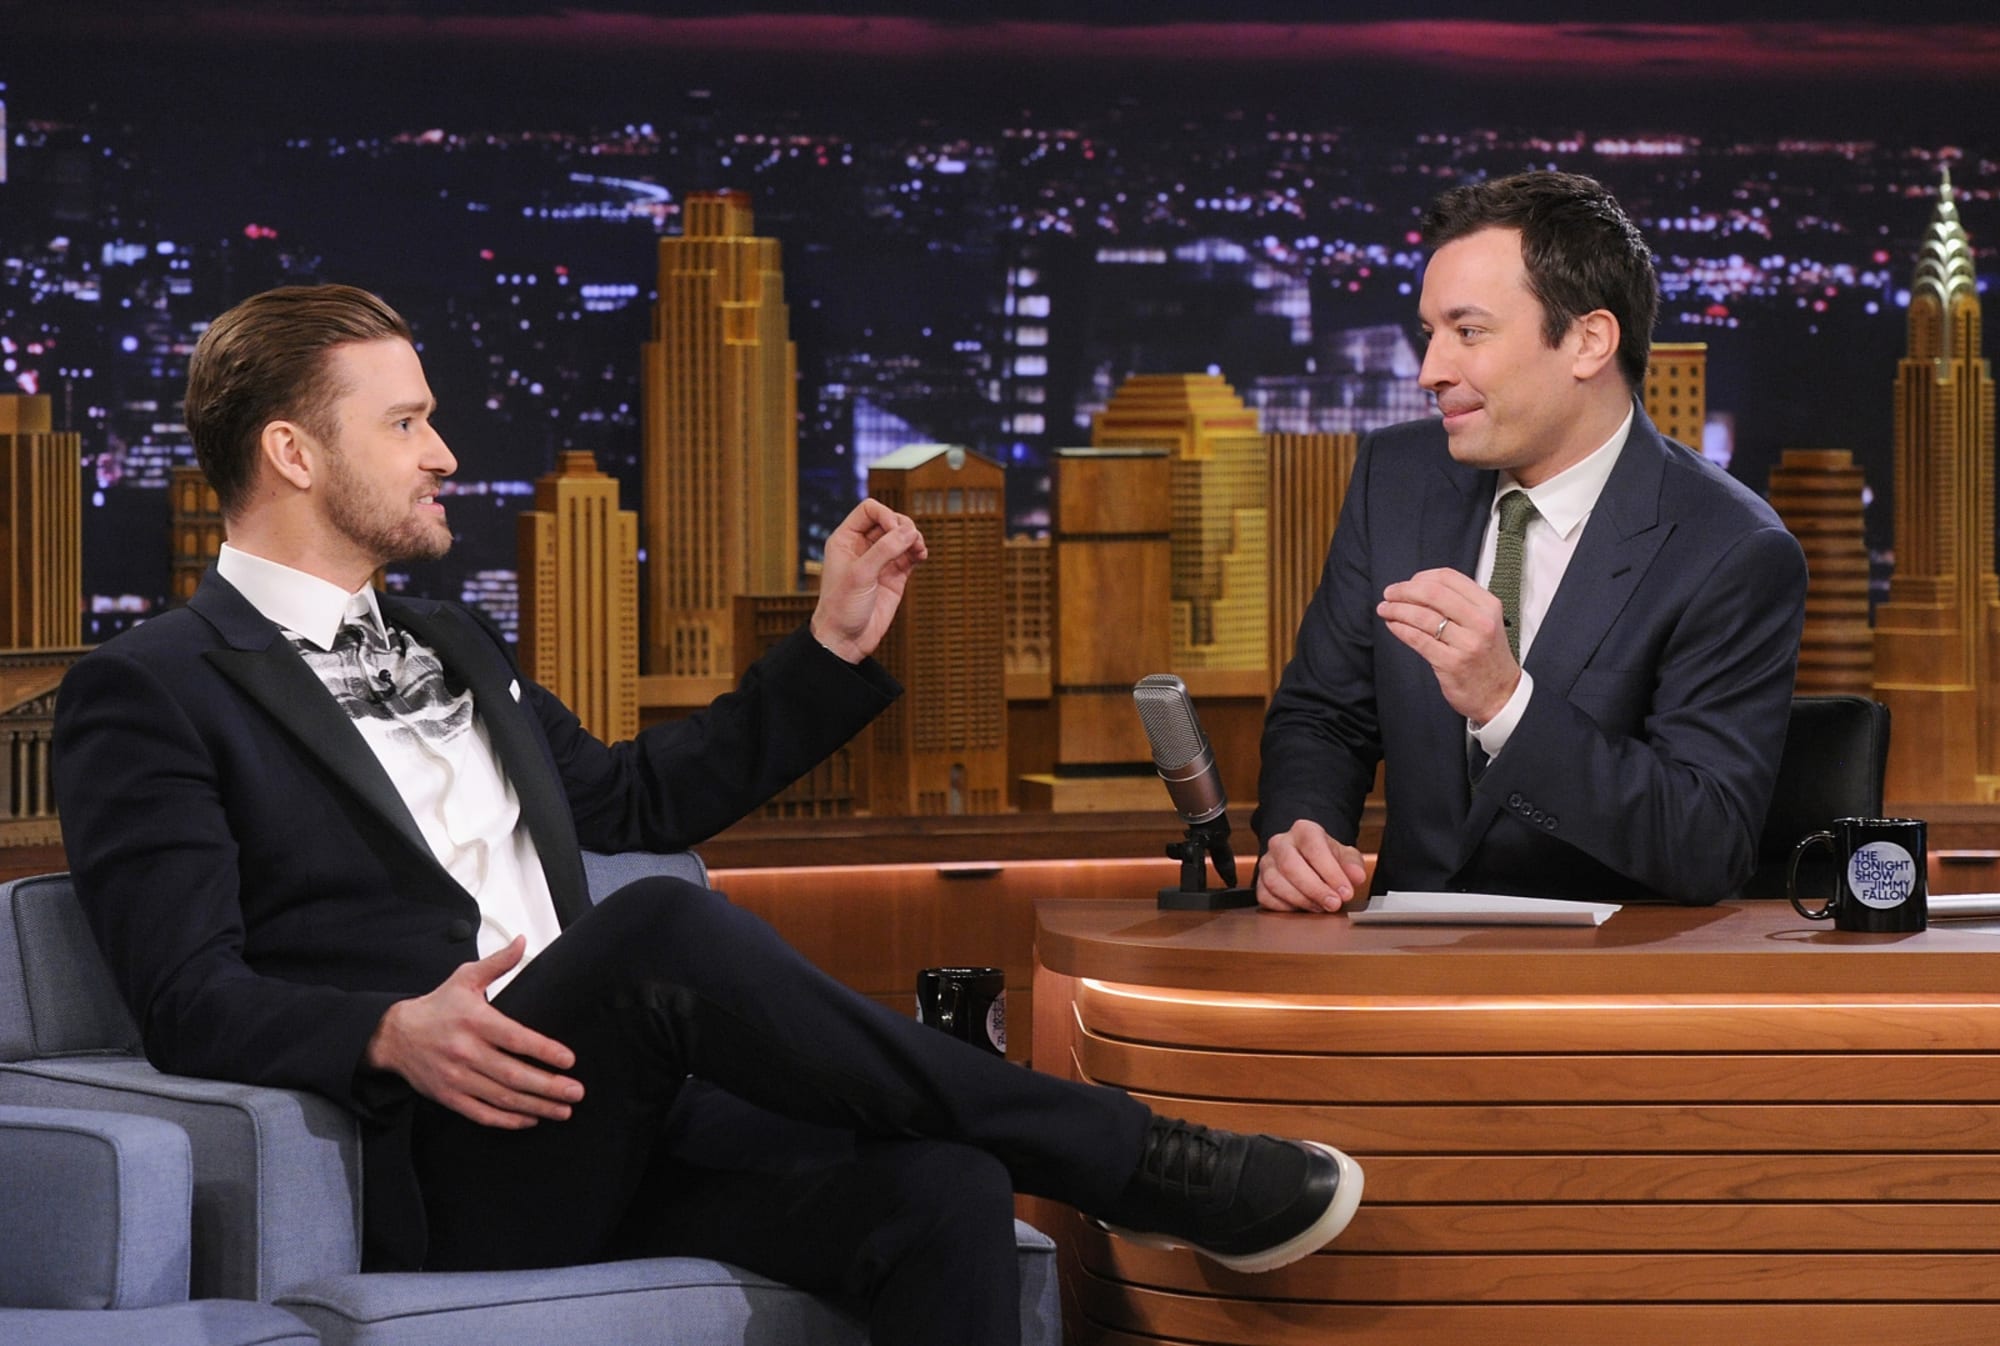 Watch the best of Justin Timberlake and Jimmy Fallon together